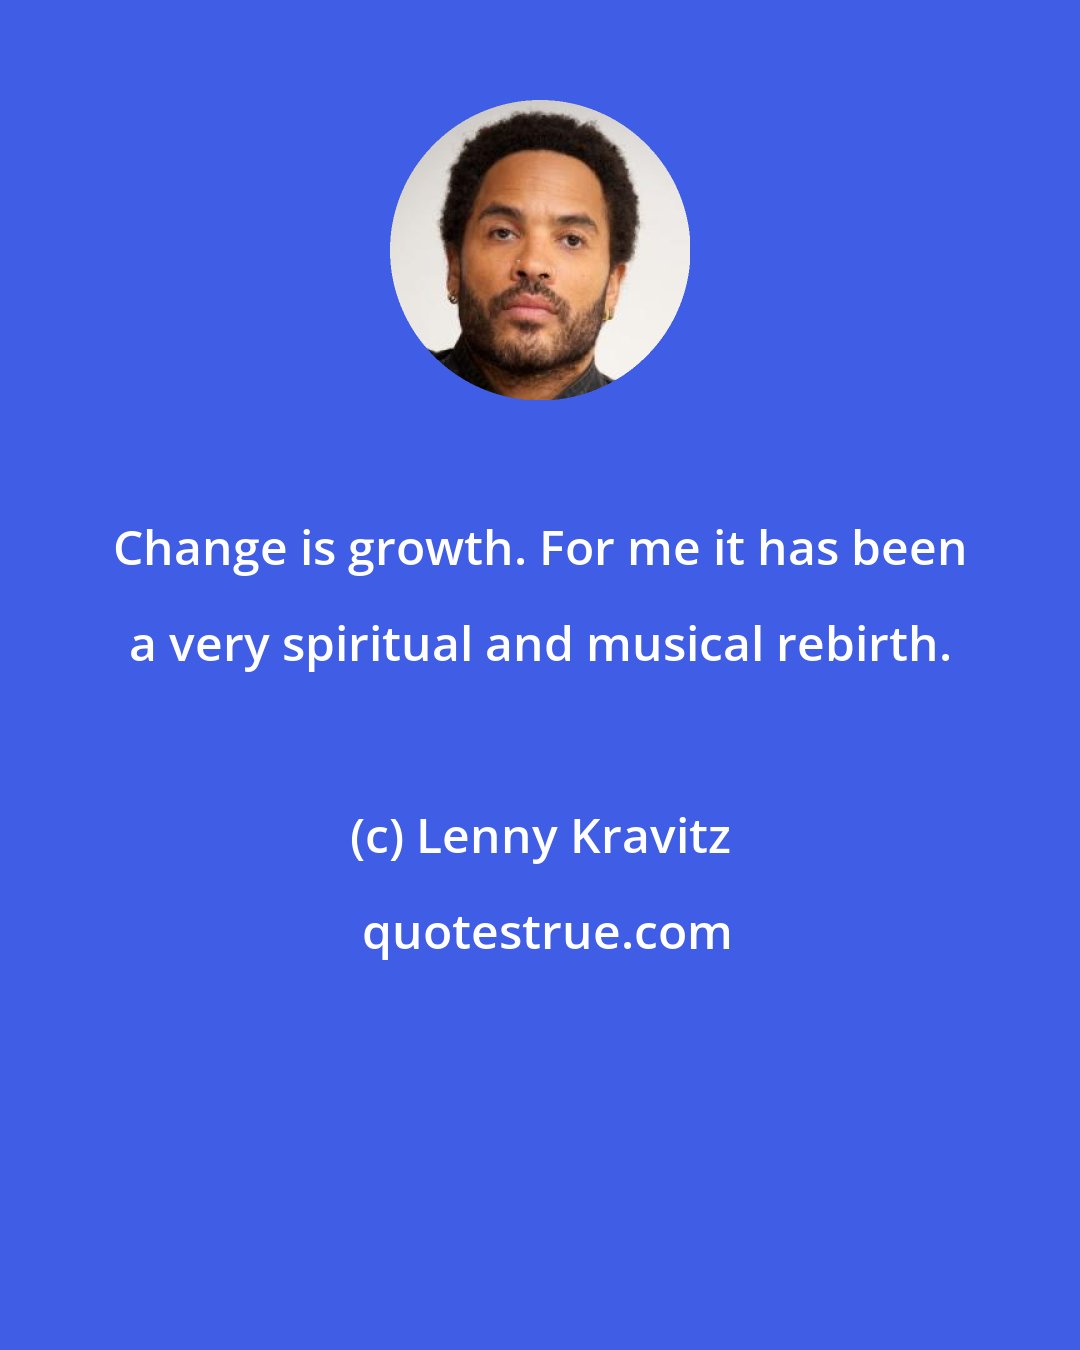 Lenny Kravitz: Change is growth. For me it has been a very spiritual and musical rebirth.